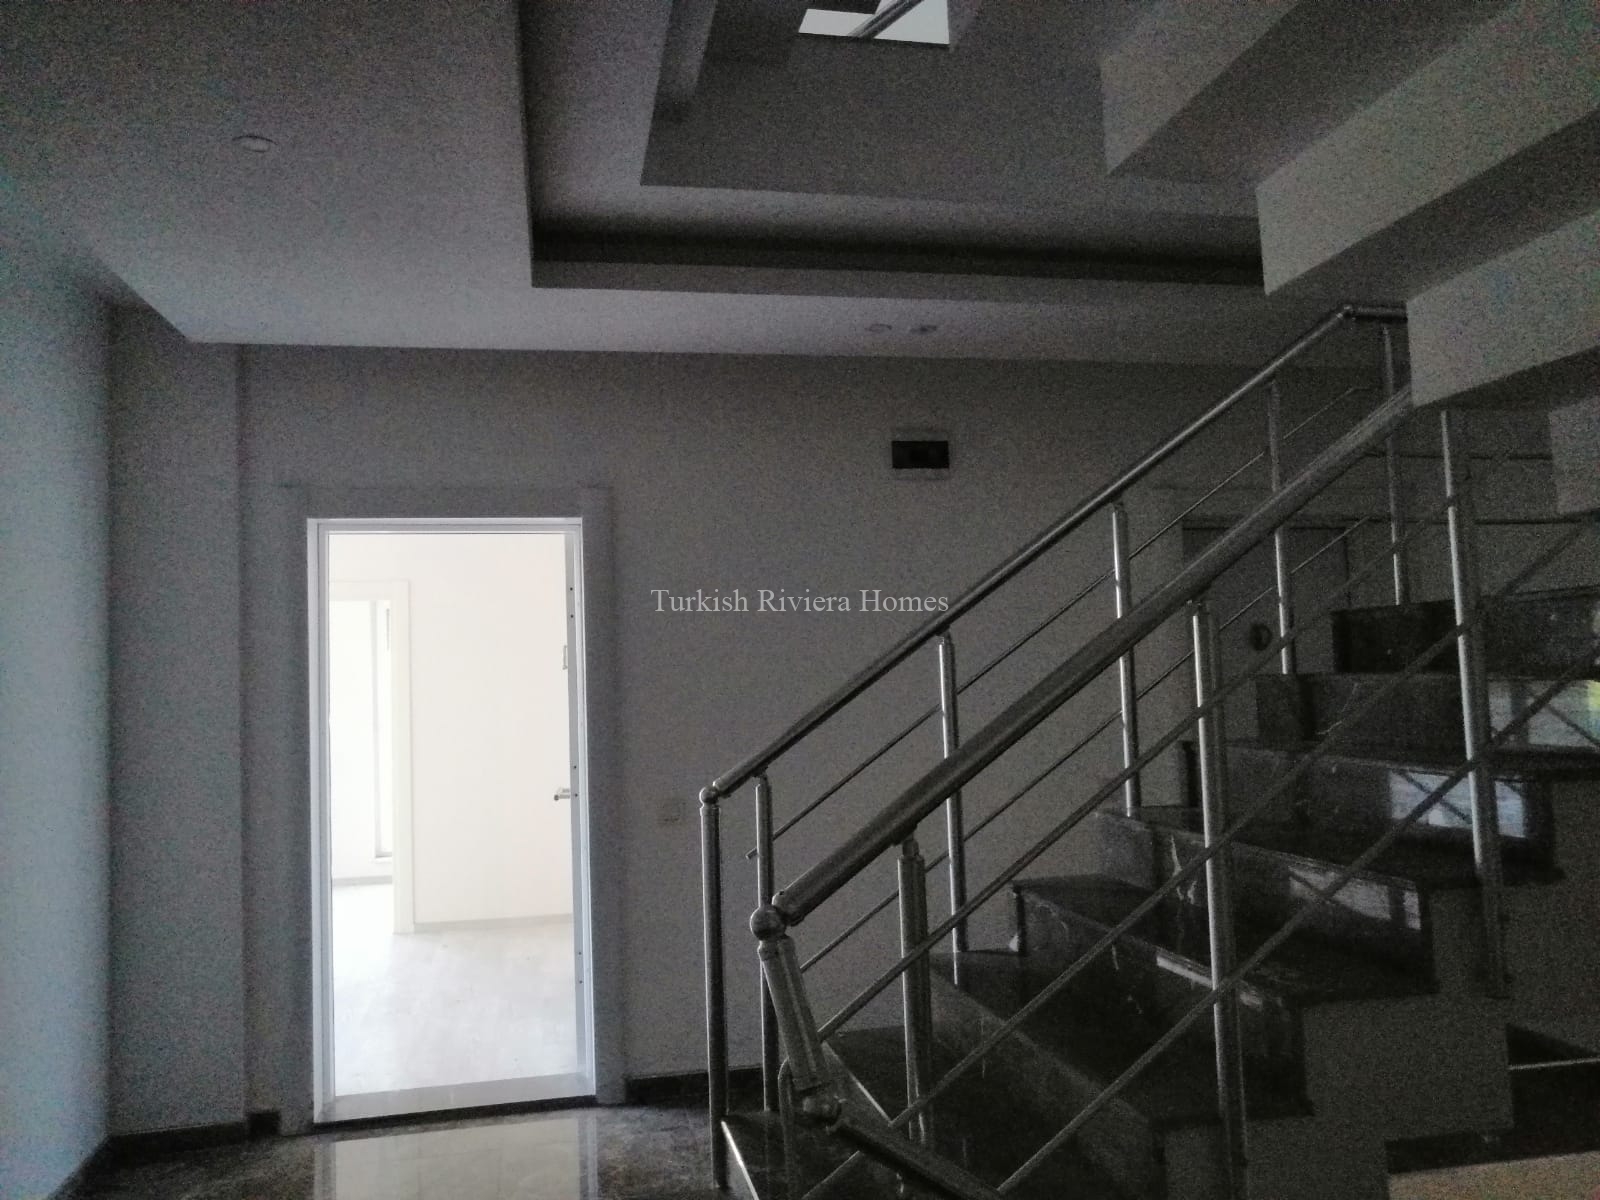 Apartments Building in a Hotel Concept Project -Stairs